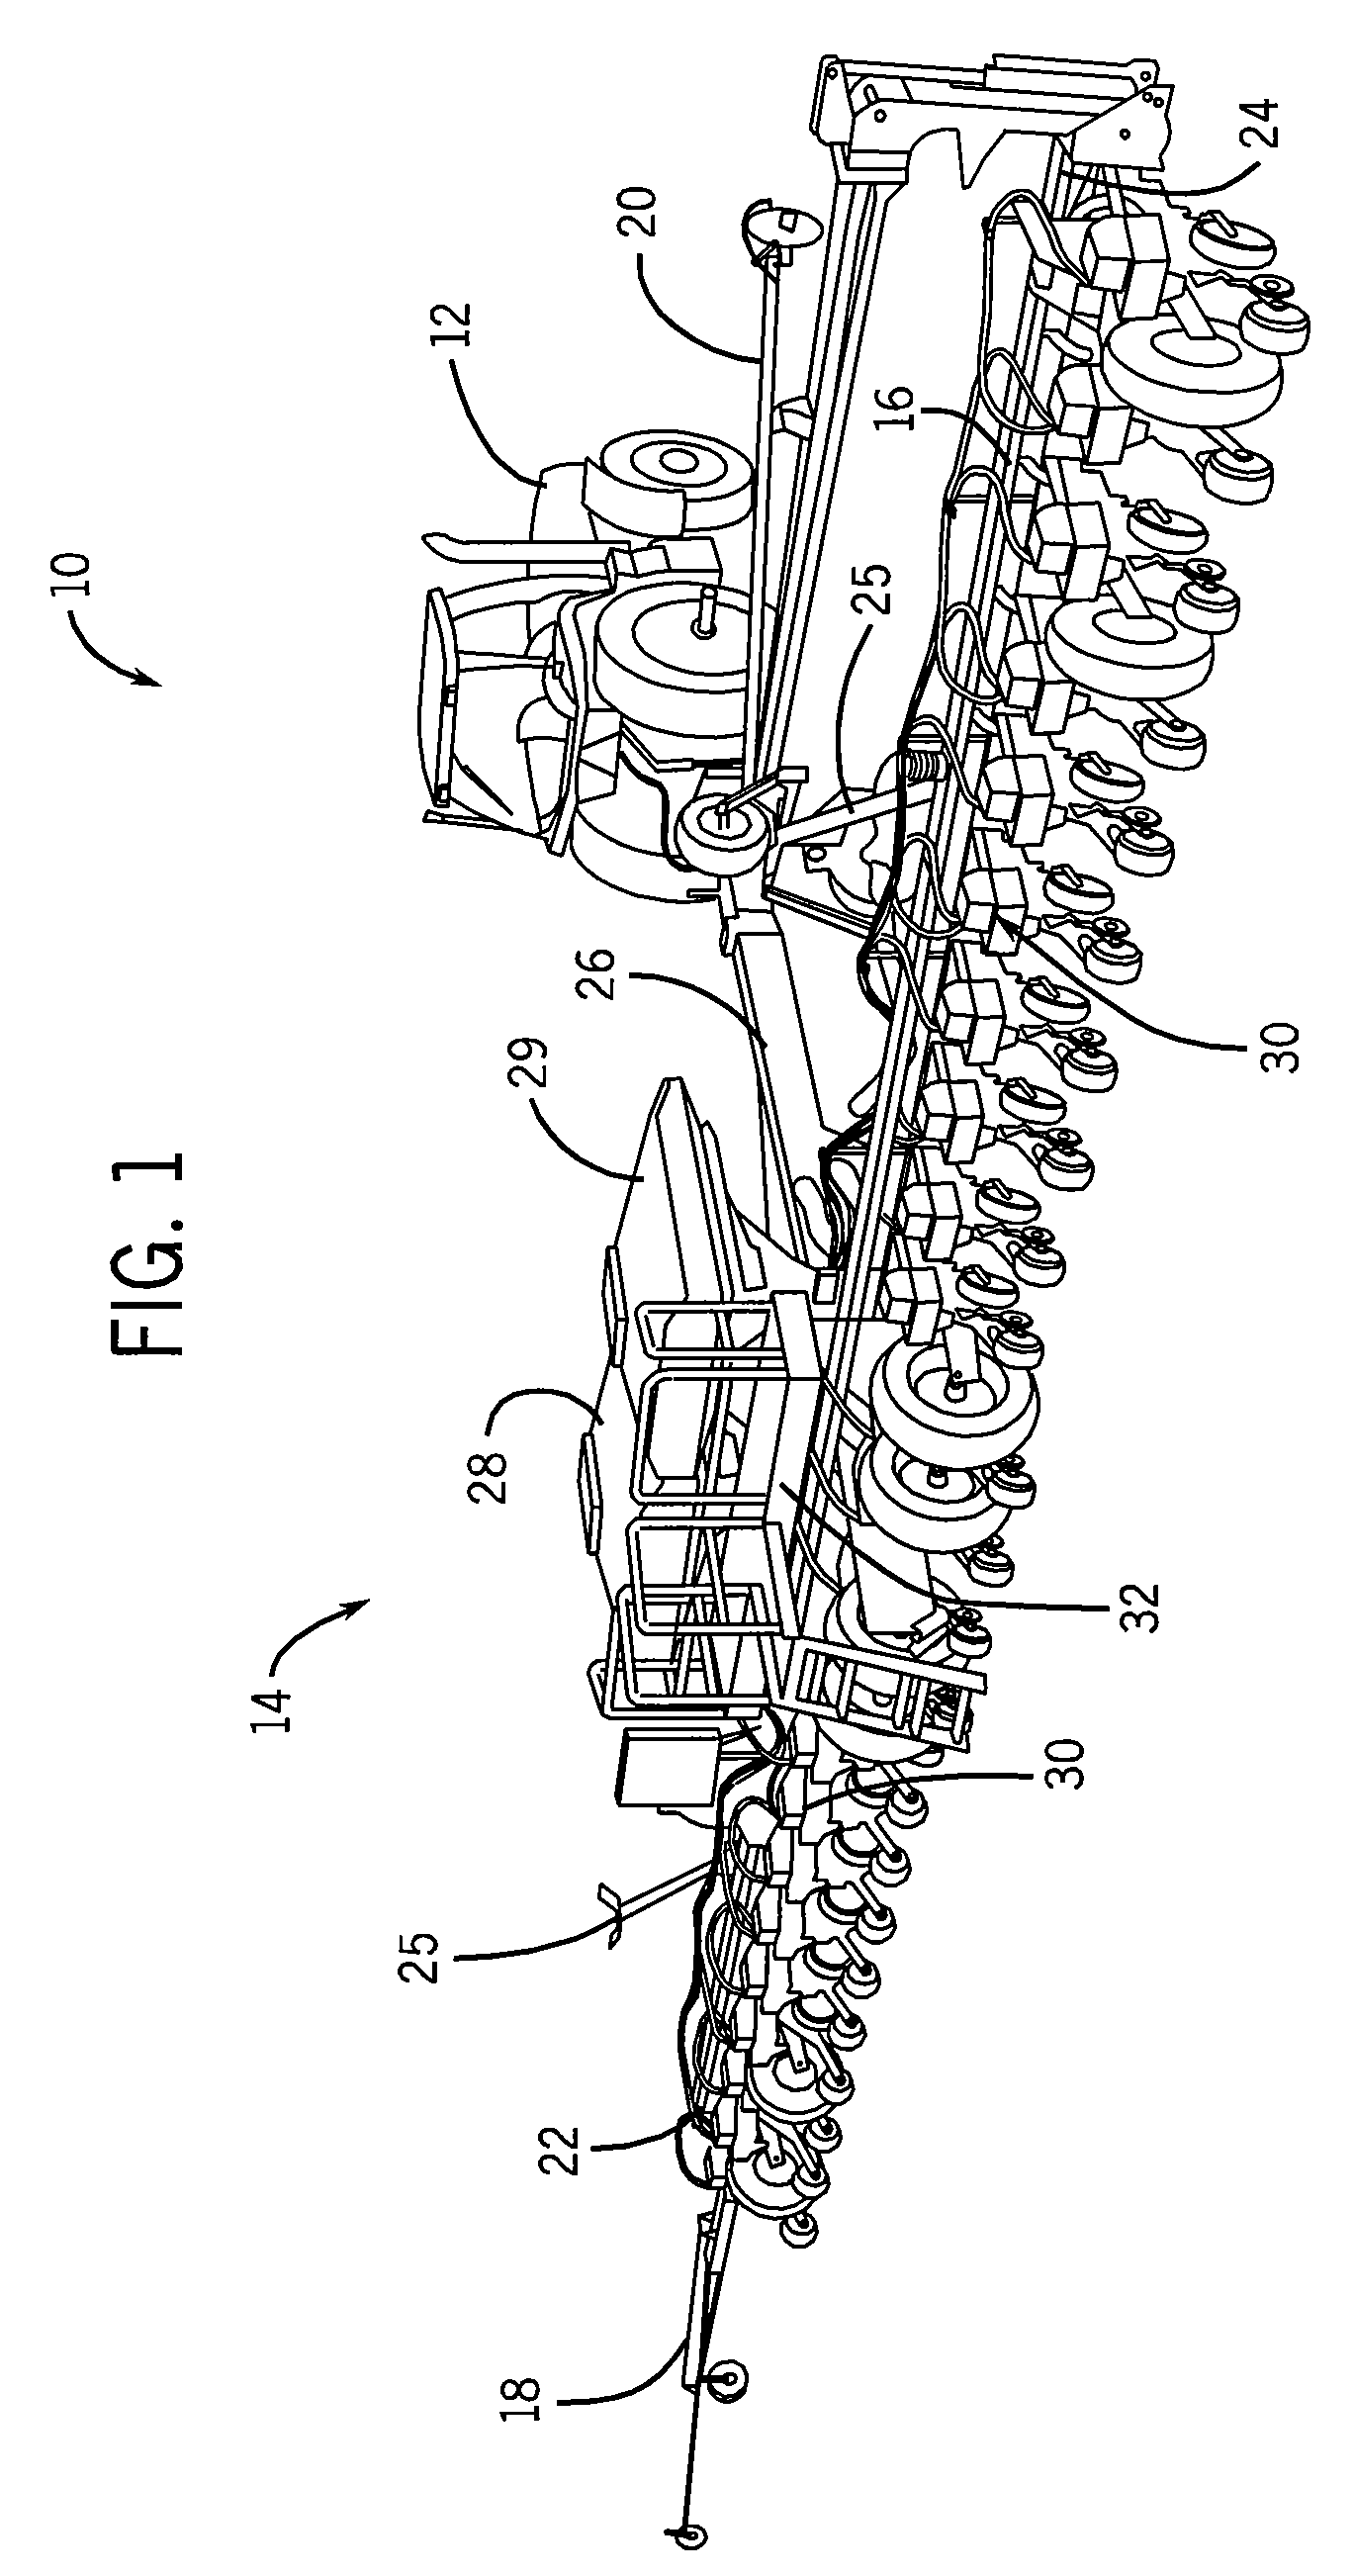 Method and apparatus for regulating air flow through supply conduits through which product entrained in an air flow is provided to multiple on-row product containers of an agricultural implement